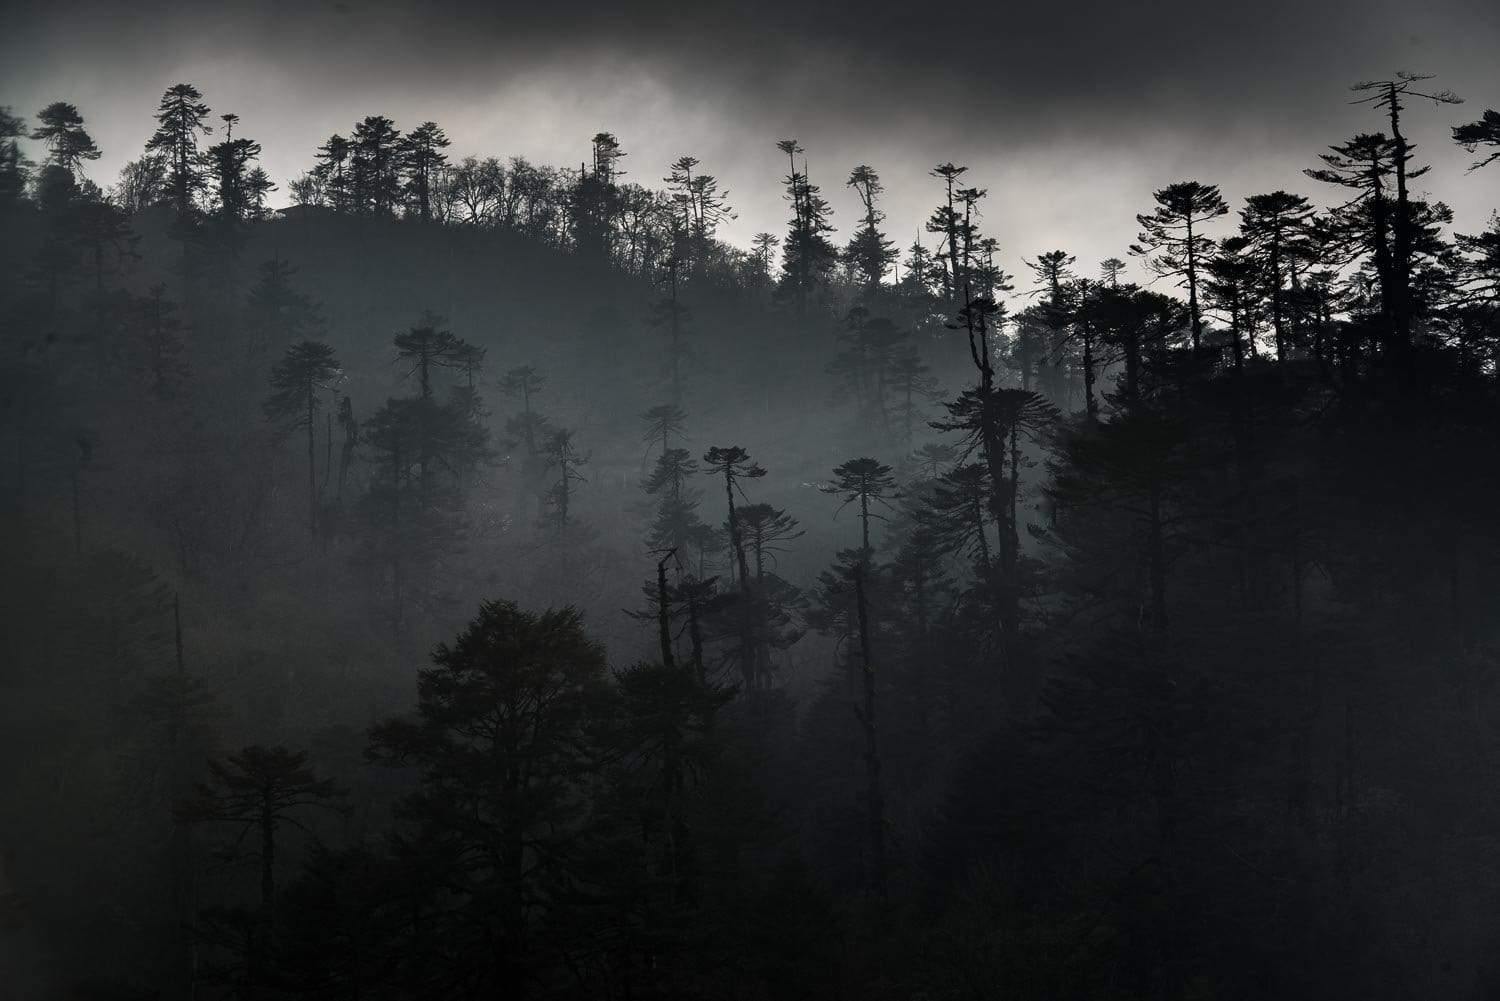 A dark picture of a forest with a series of long-standing trees, and a lot of darkness everywhere, Black Forest #2, Bhutan 